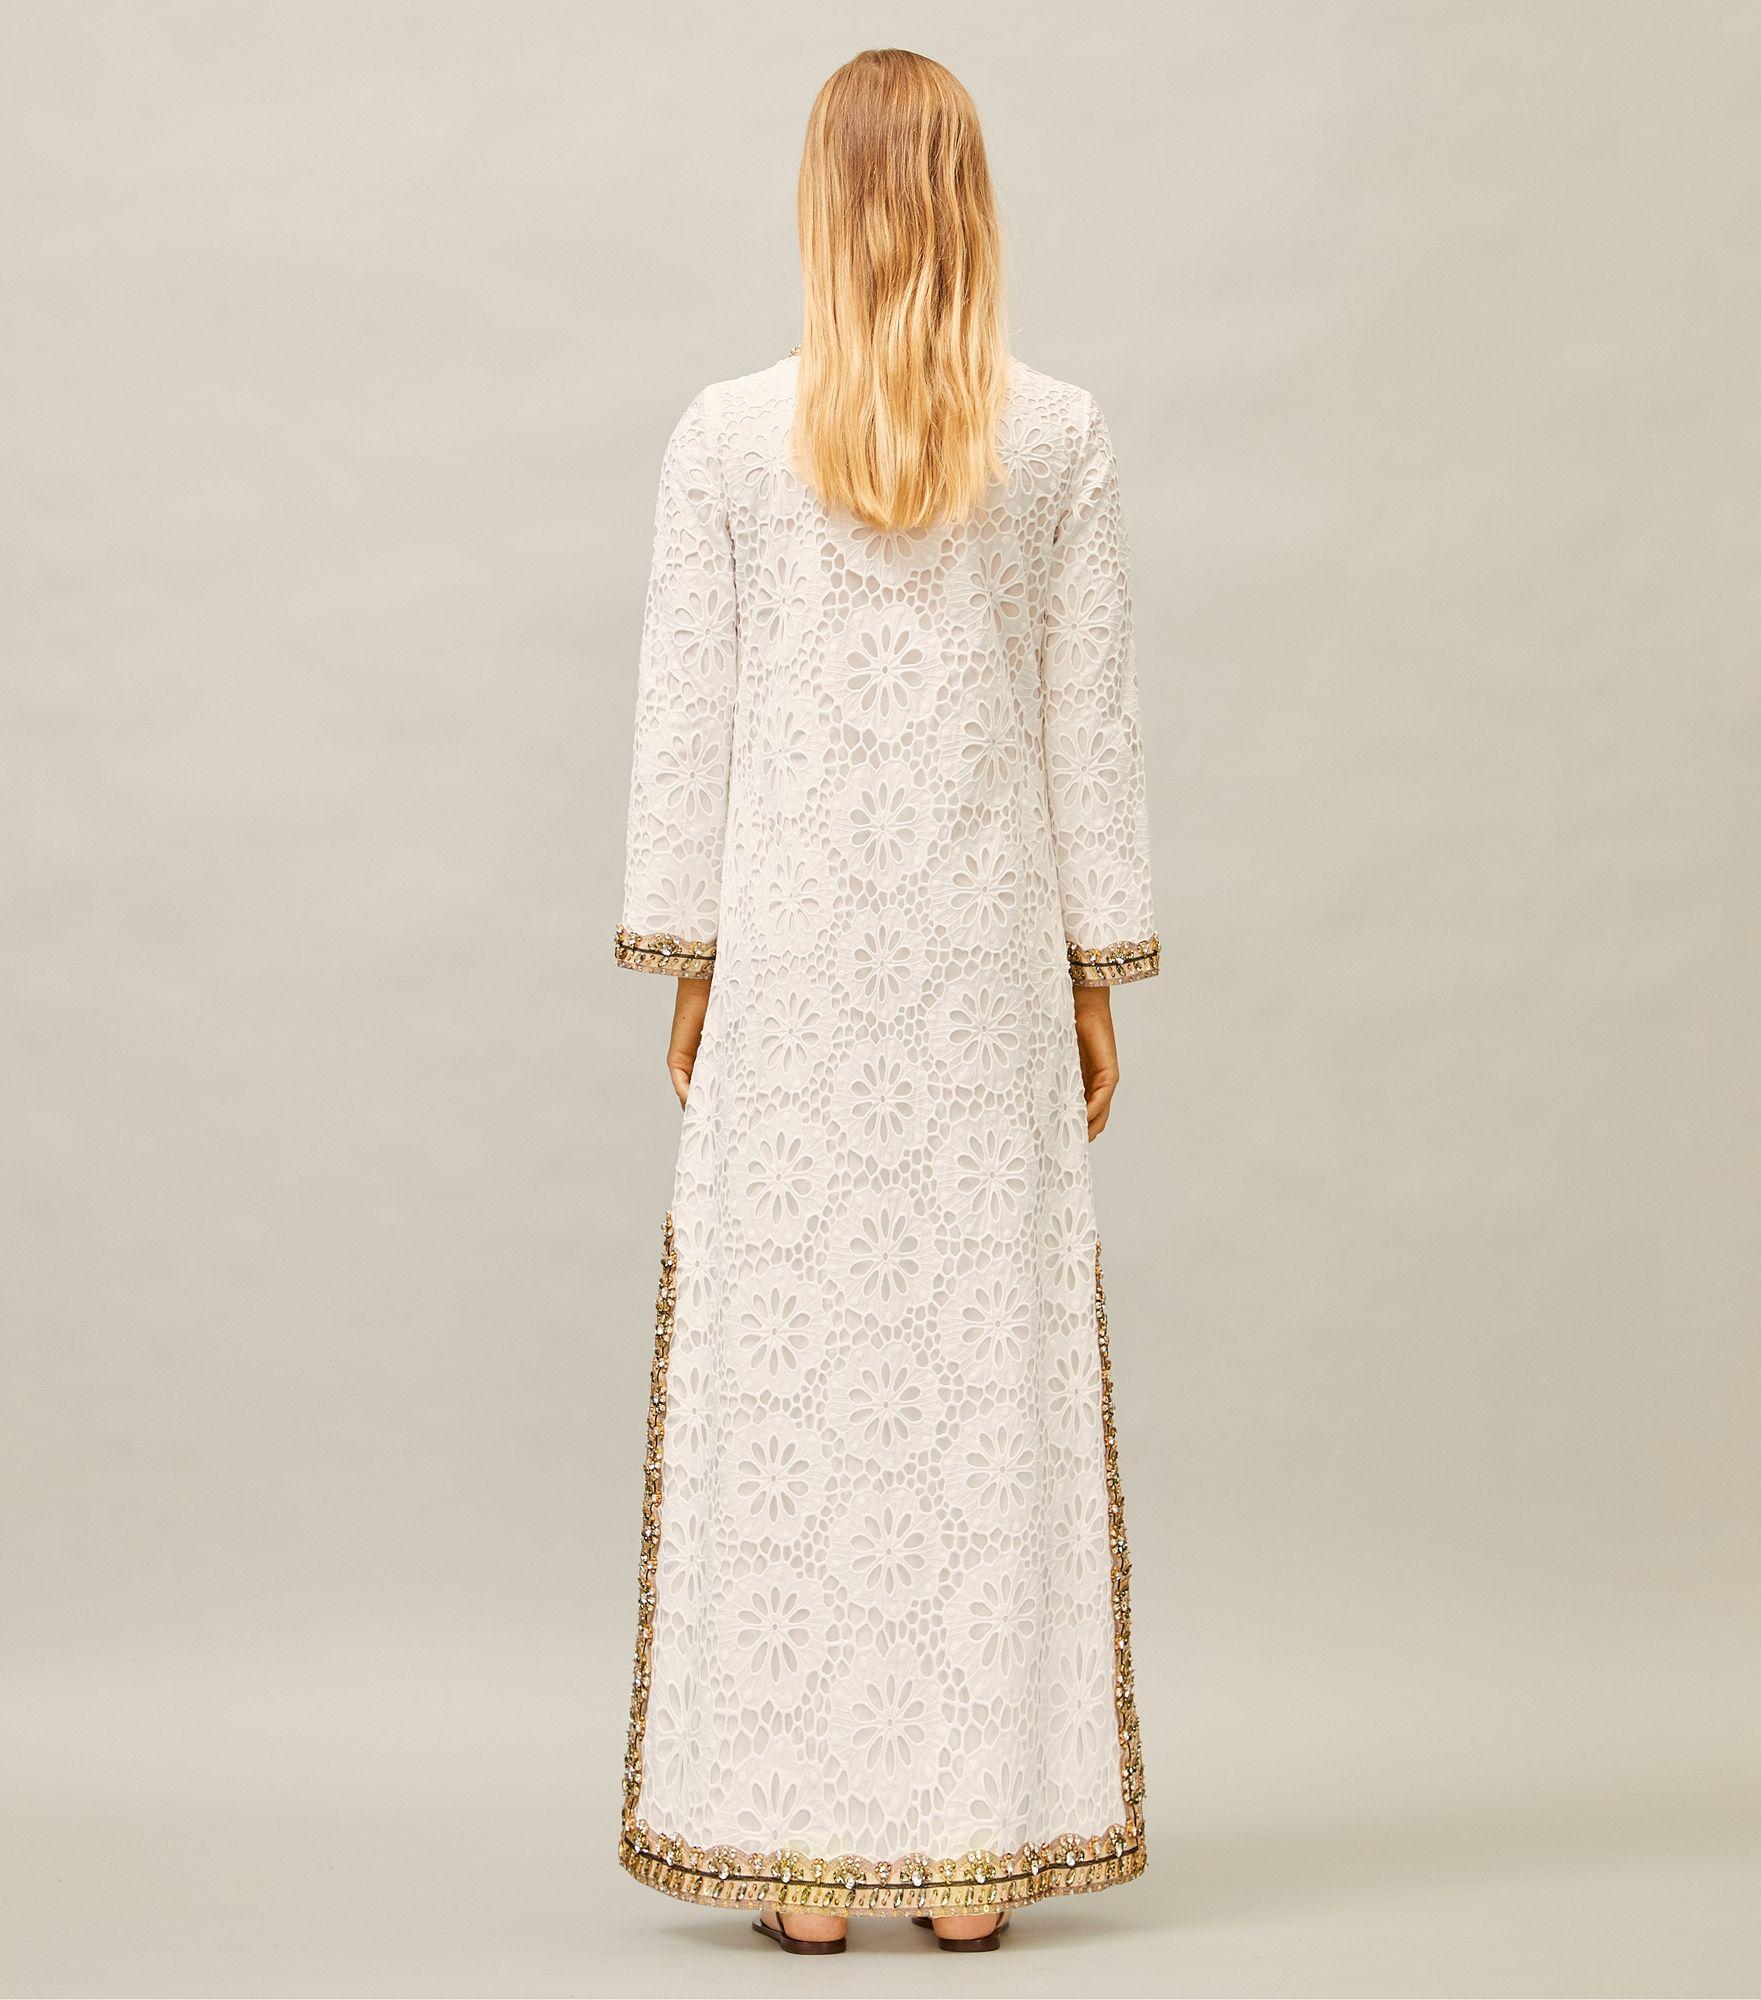 Tory Burch Embellished Lace Caftan Dress in White | Lyst